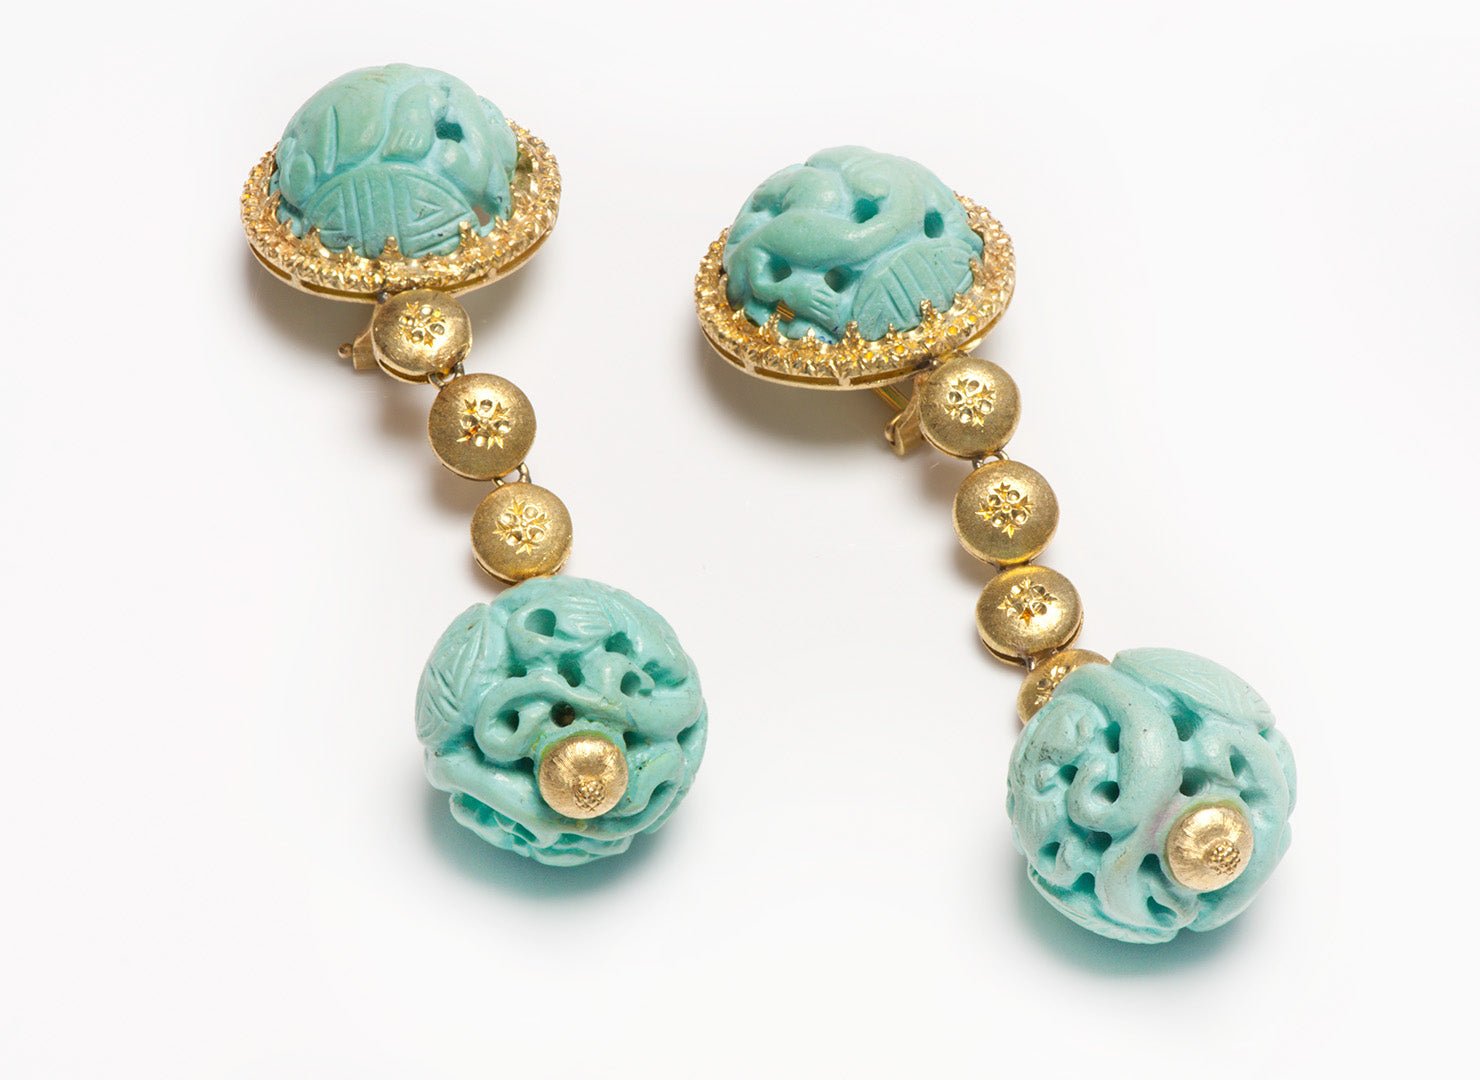 Buccellati 18K Gold Carved Turquoise Earrings - DSF Antique Jewelry